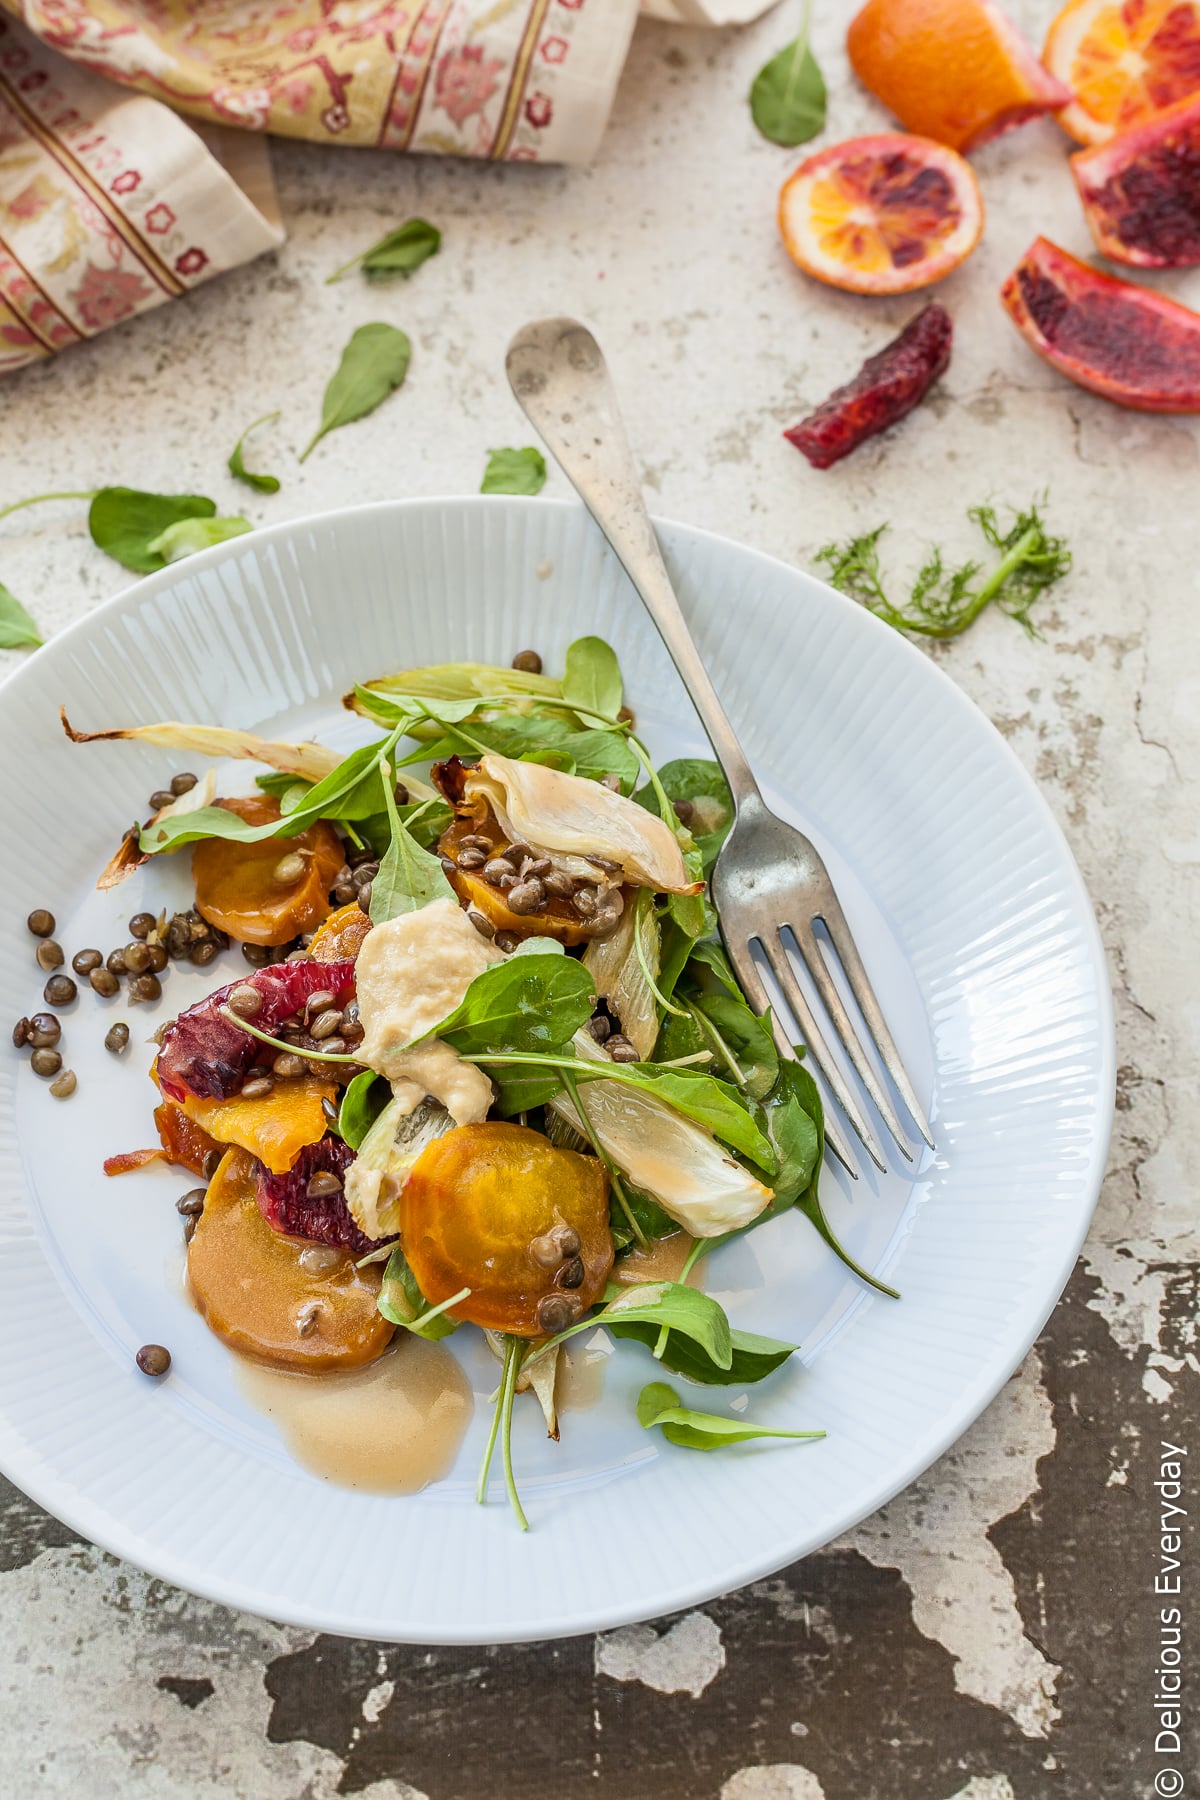 Even on the coldest and dreariest winters day, this beautiful vegan Roast Beetroot Salad with Lentils, Fennel and Blood Orange will brighten up your day. And your palate!